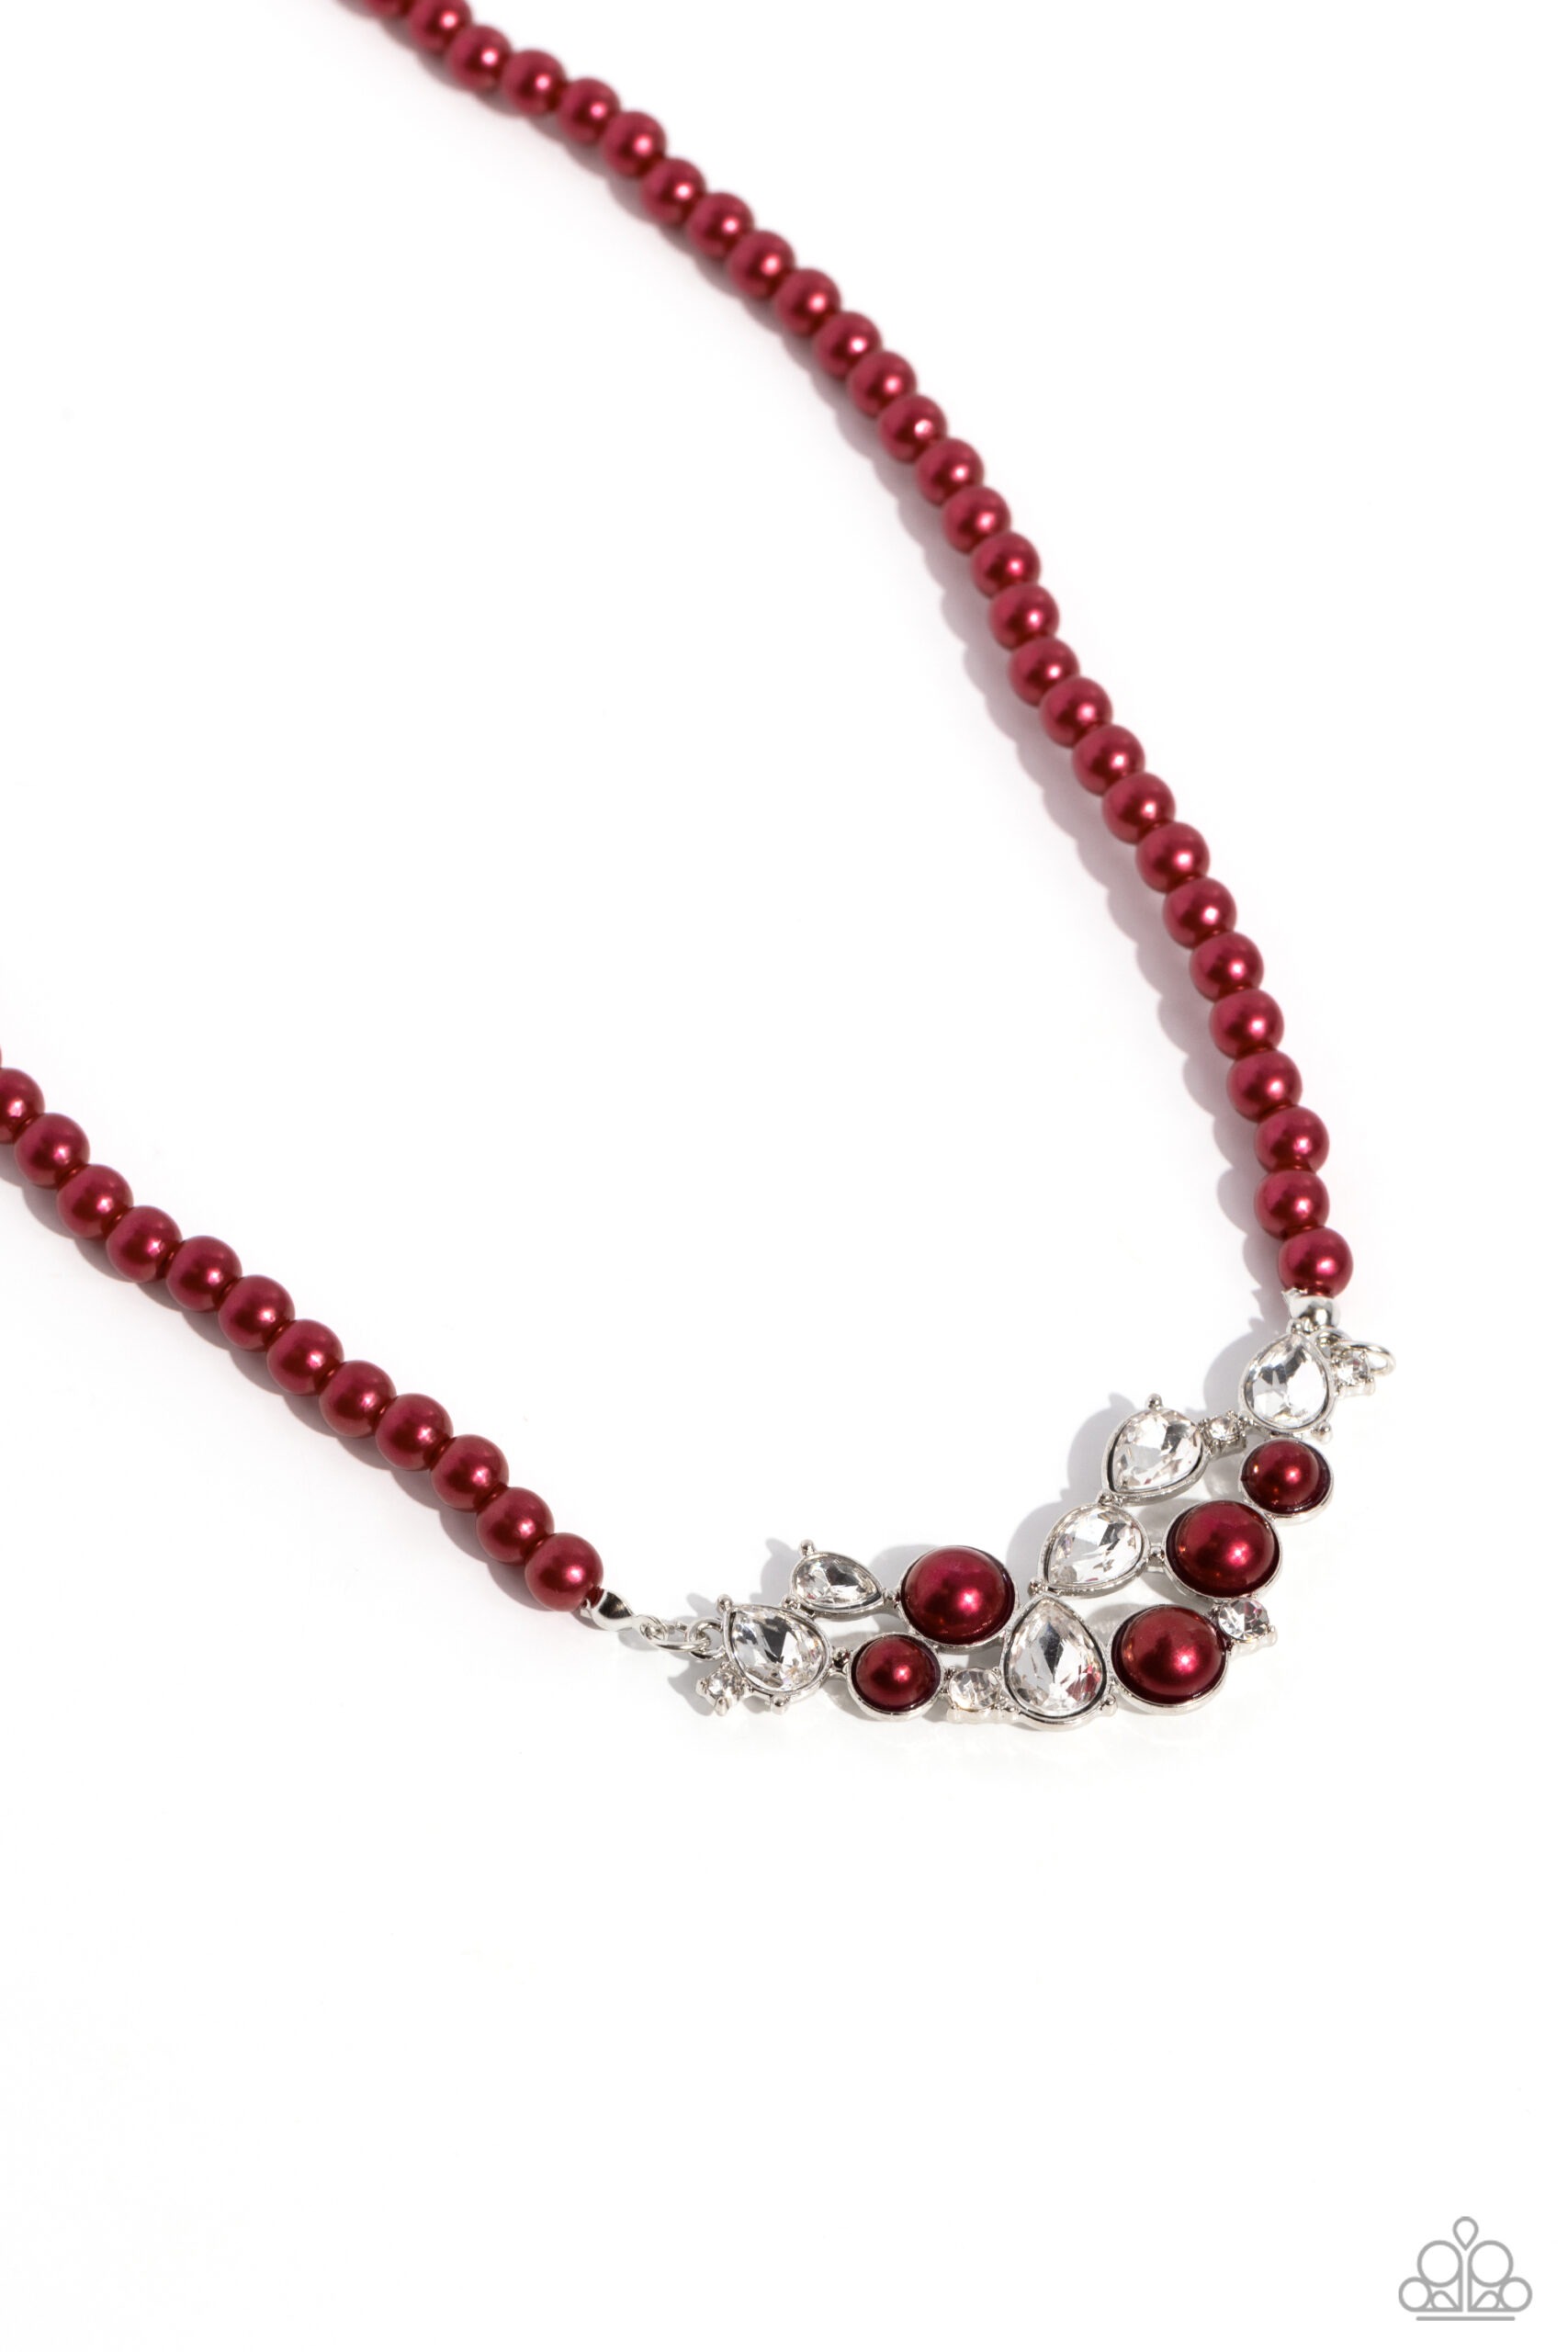 Necklace - Pampered Pearls - Red